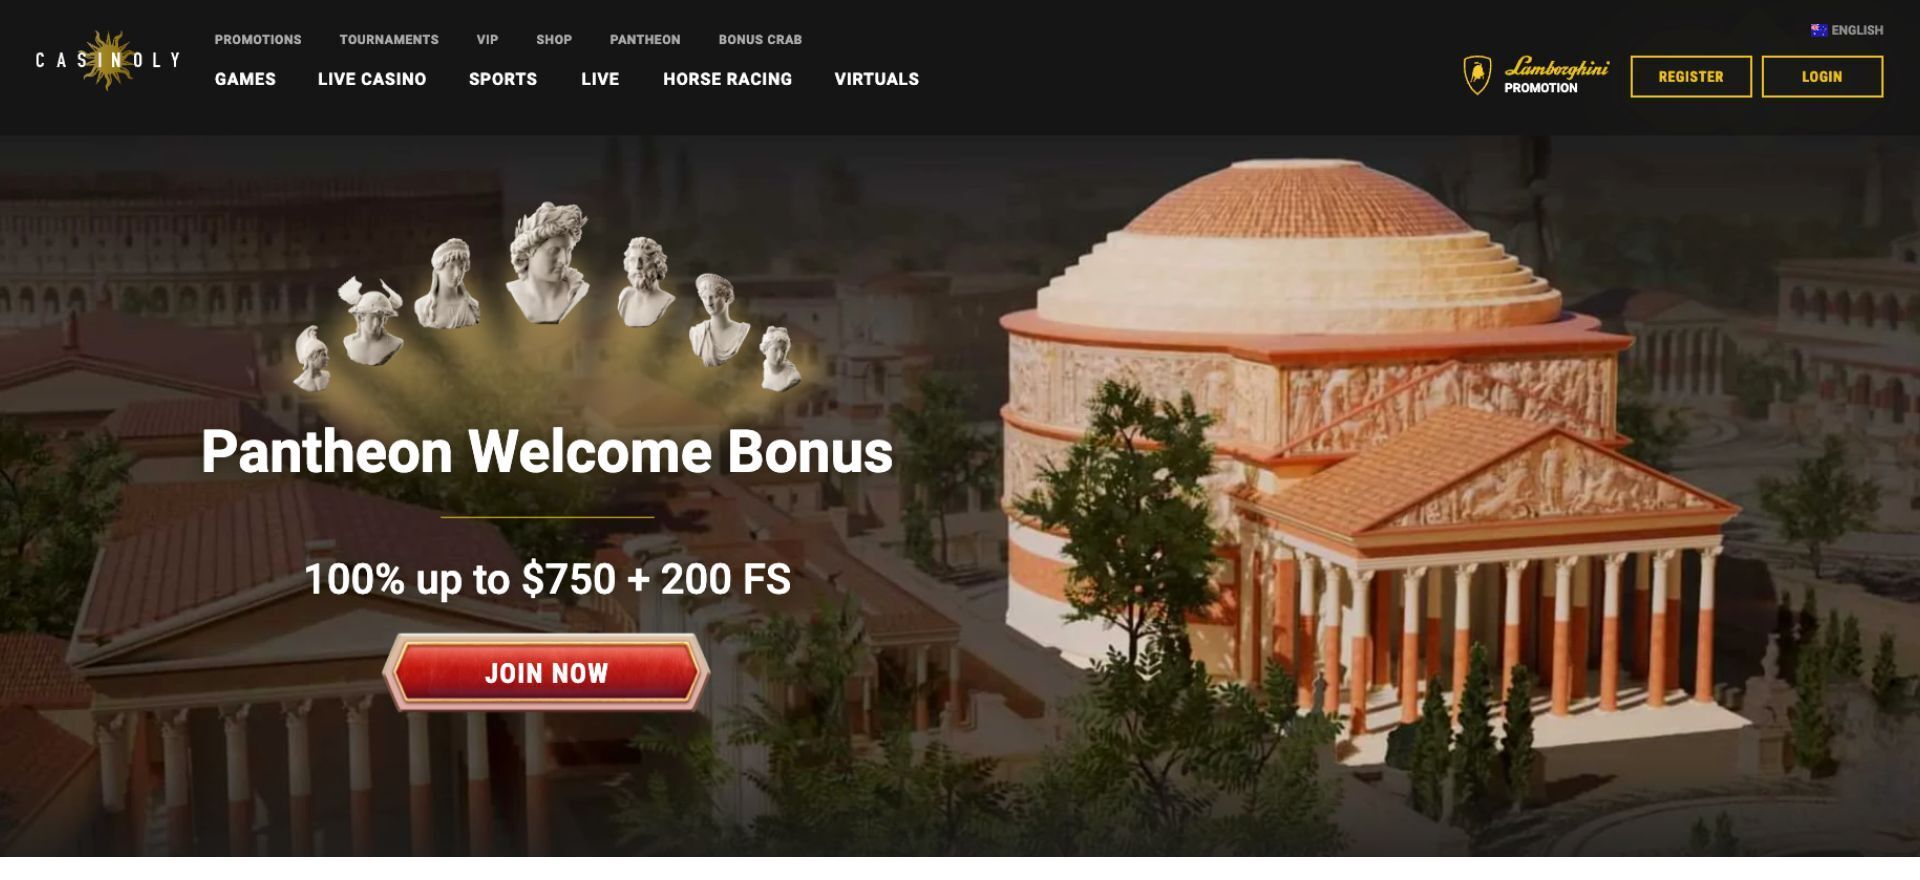 Casinoly Welcome Page